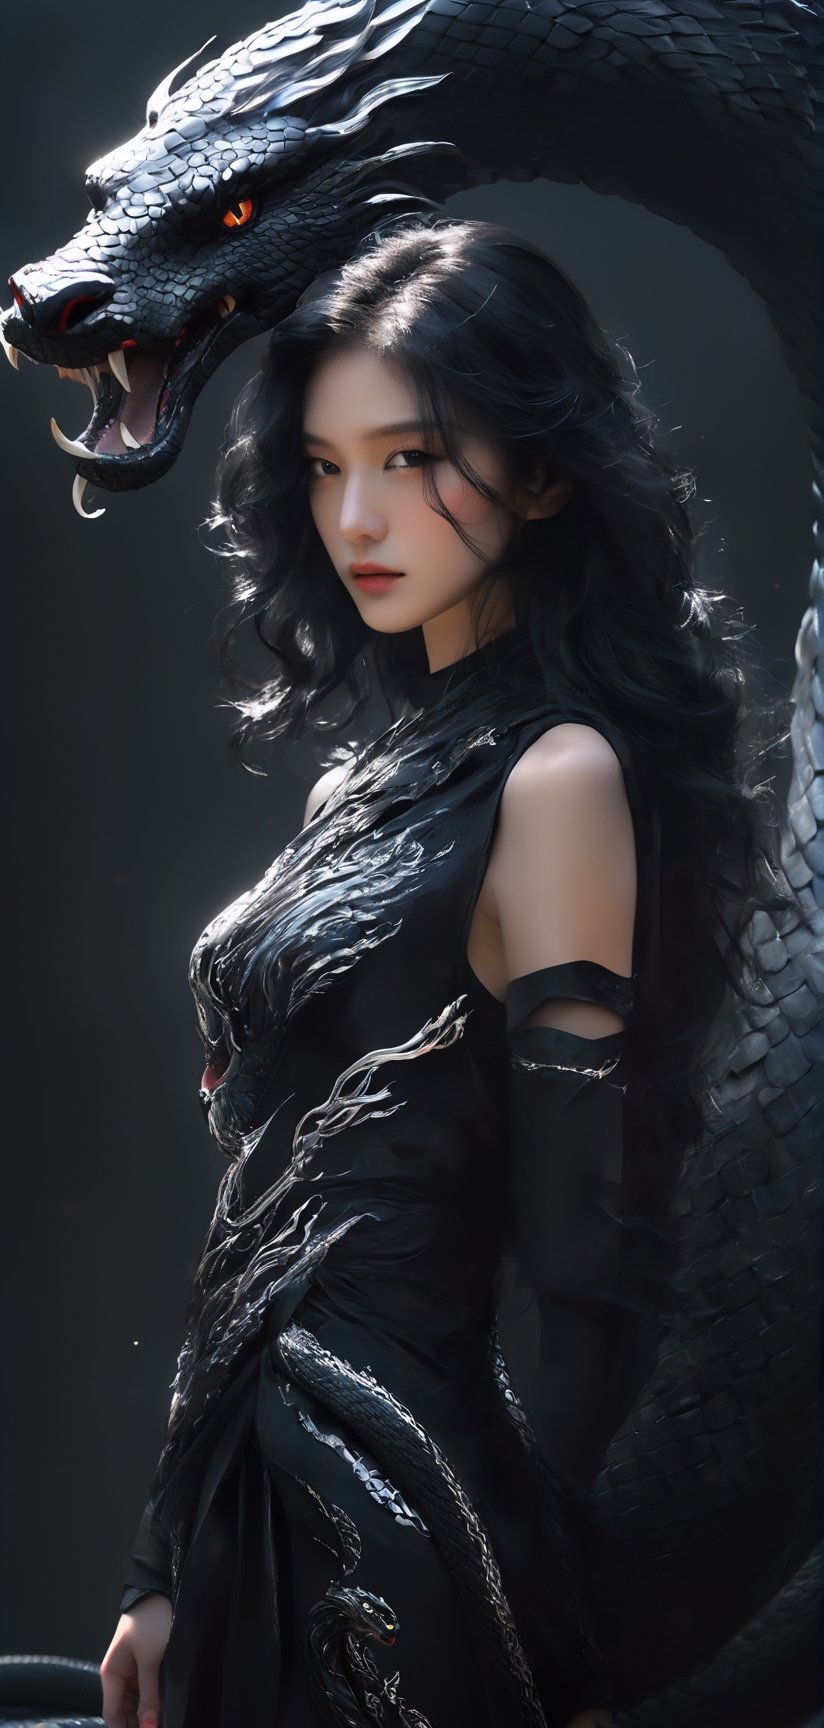 woman 20 years old wearing a black armor-dress, she has black wavy hair with a streak of white hair, around her a powerful serpent is her pet, fantasy art, raytraced, light particles, art by Mschiffer